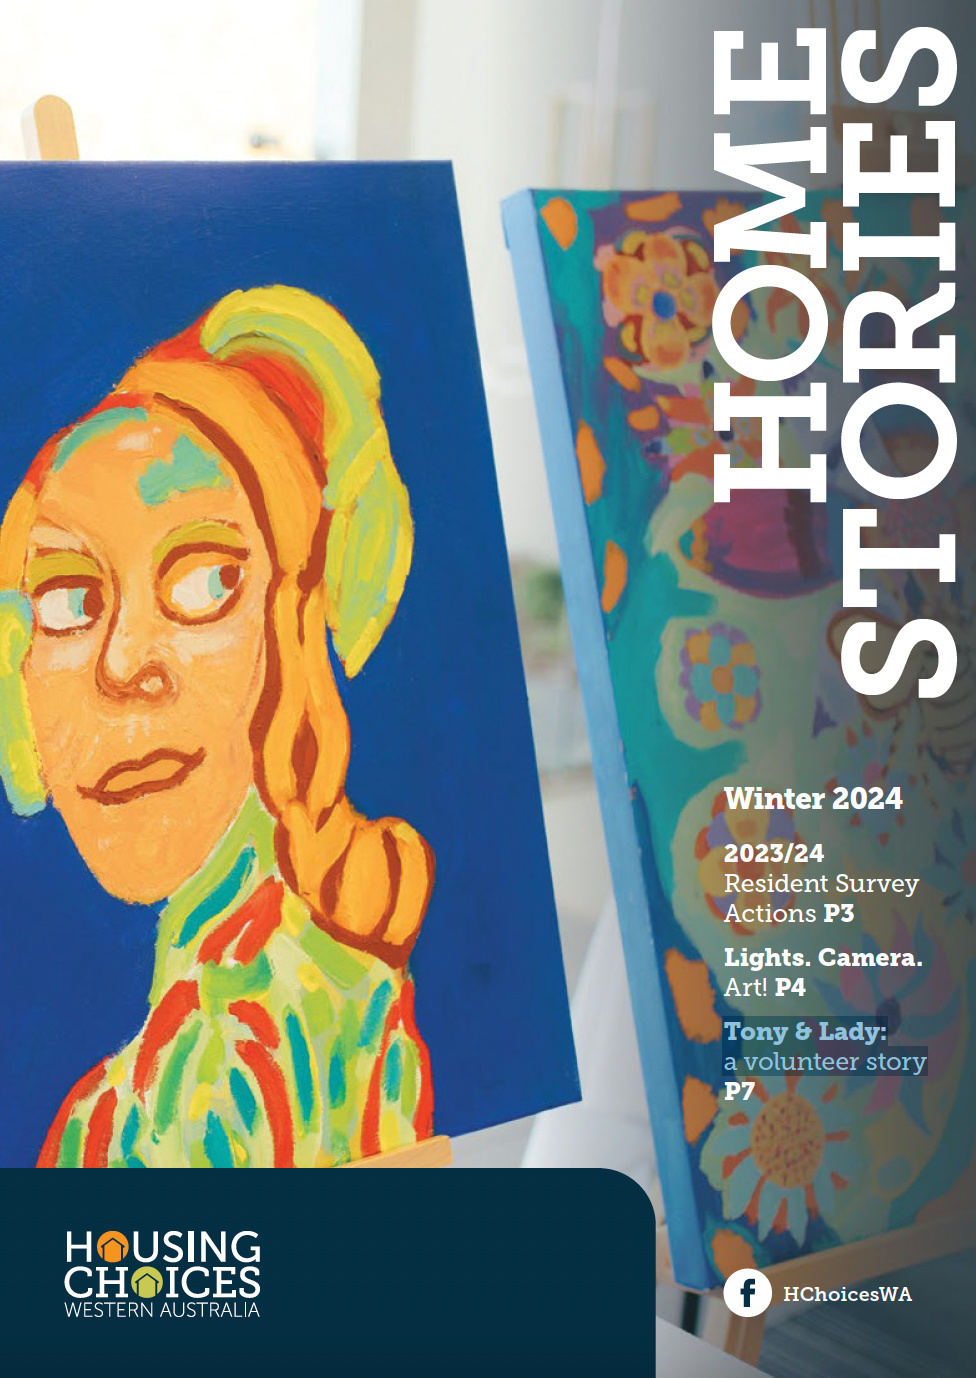 Housing Choices Home Stories Western Australia Cover with residents artwork